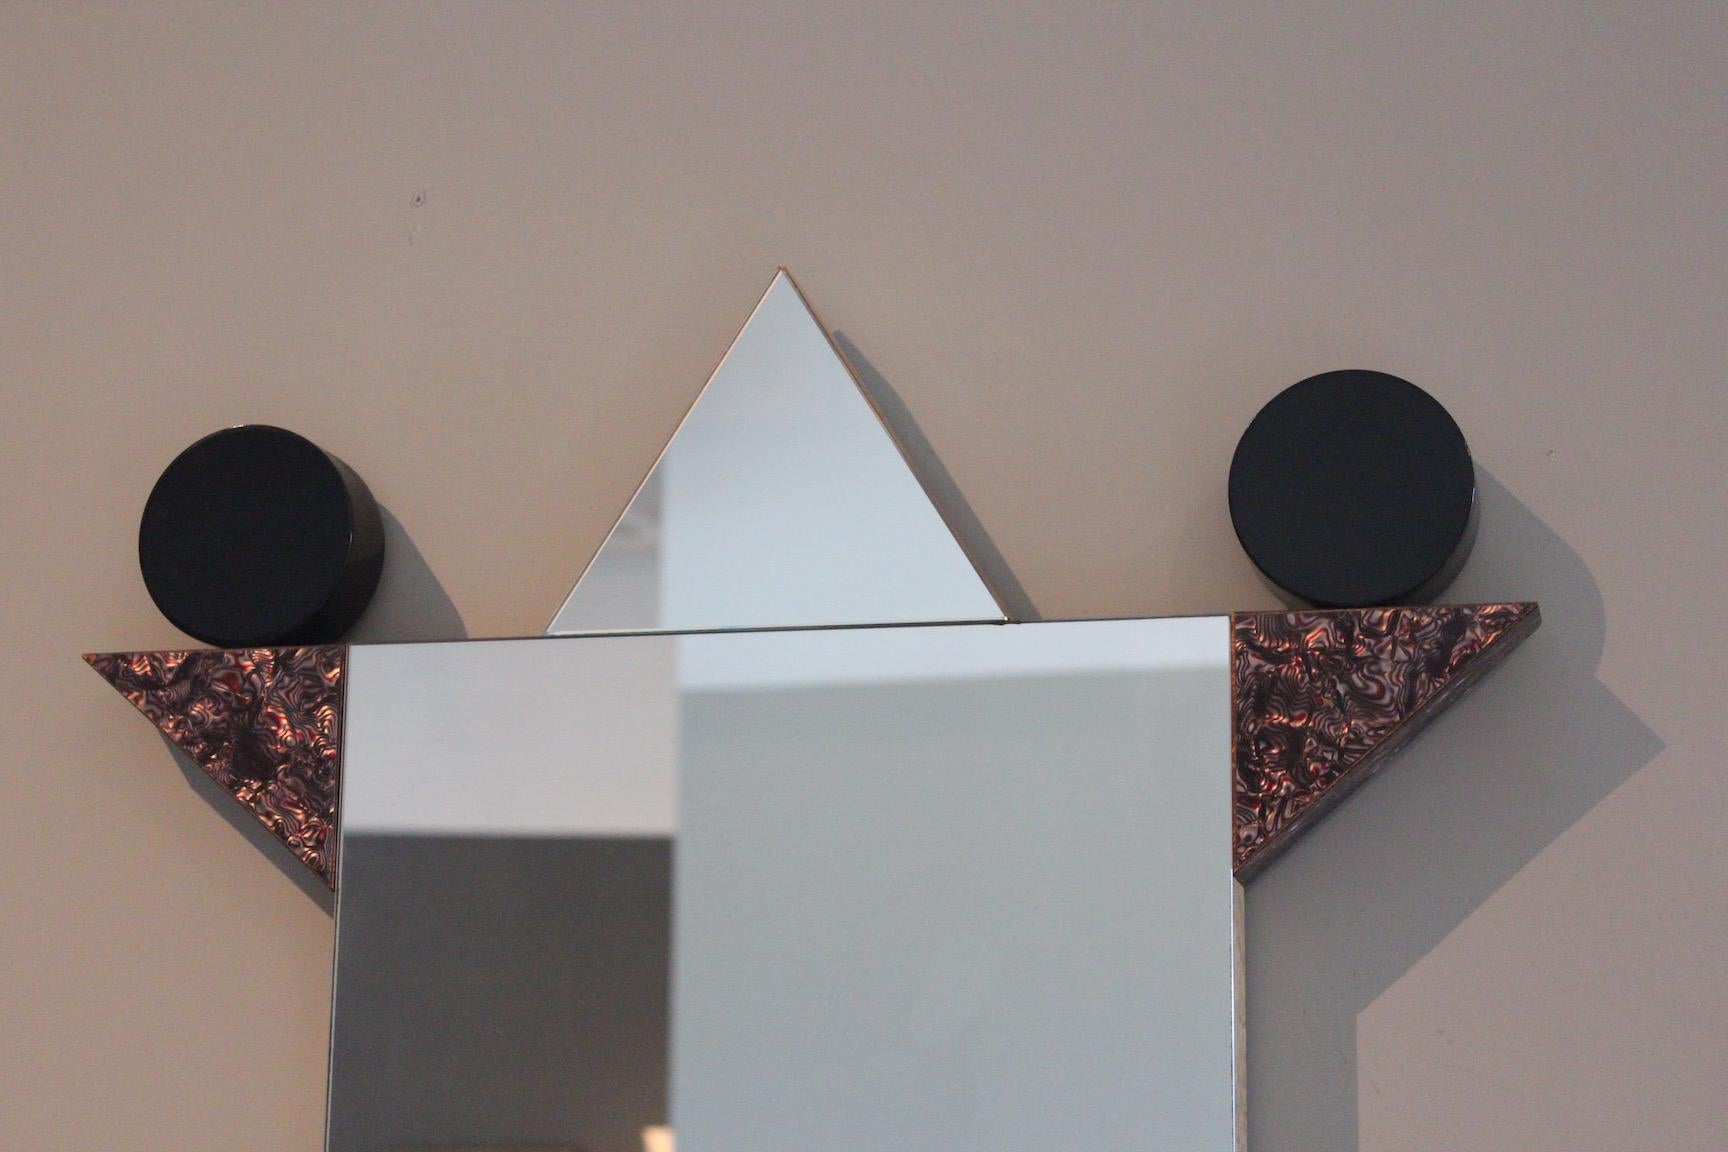 Vintage Diva mirror by Ettore Sottsass for Memphis Milano, 1984.